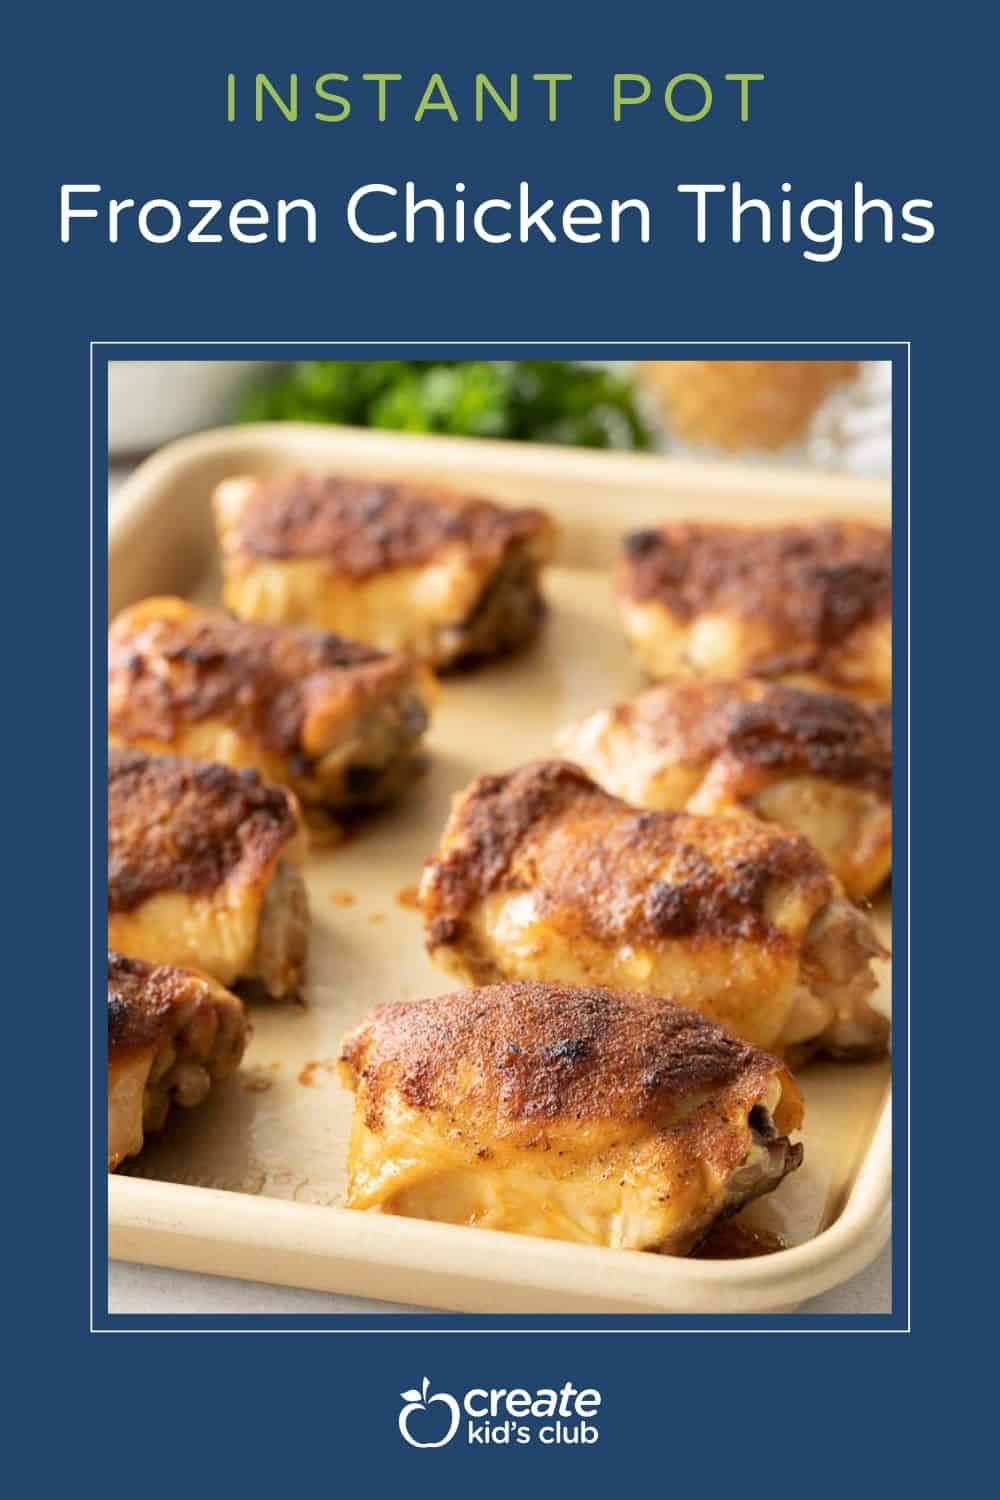 pin of crispy chicken thighs on a baking tray